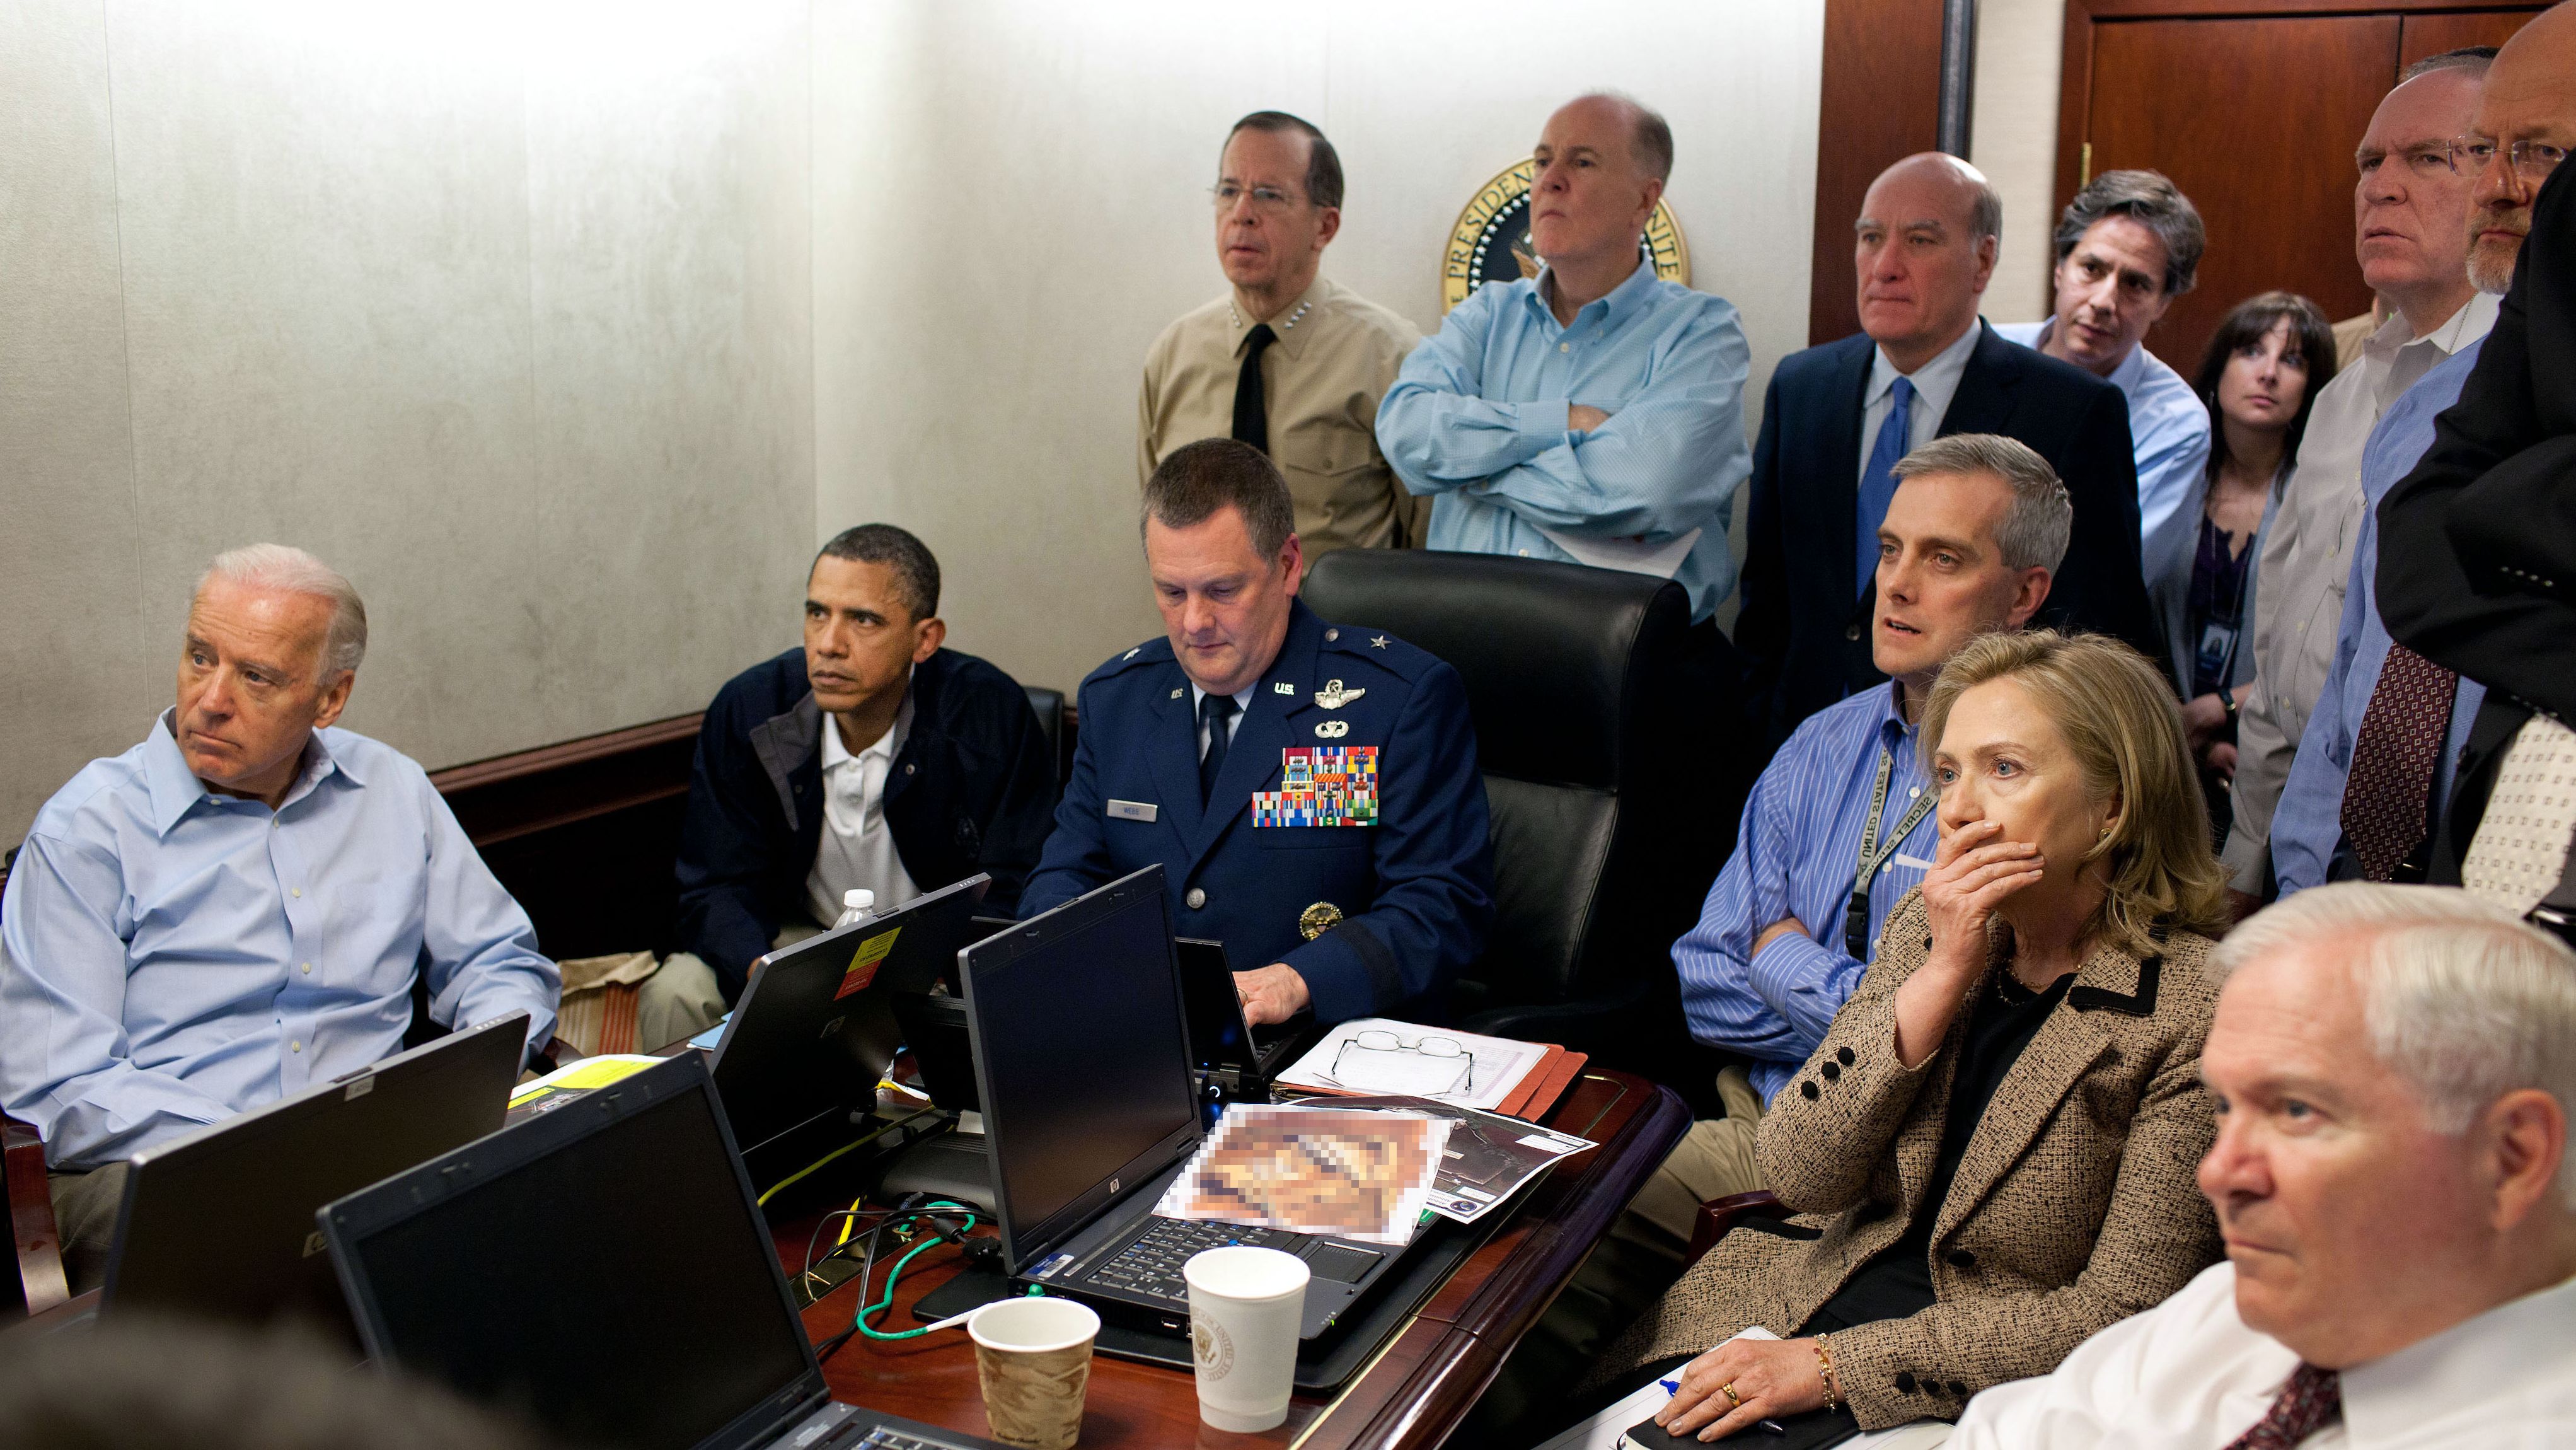 US President Barack Obama and members of his national security team monitor the Navy SEALs raid that killed Osama bin Laden in May 2011. "Fourteen people crammed into the room, the President sitting in a folding chair on the corner of the table's head," <a href="https://www.cnn.com/2016/04/30/politics/obama-osama-bin-laden-raid-situation-room/" target="_blank">said CNN's Peter Bergen as he relived the bin Laden raid five years later.</a> "They sat in this room until the SEALs returned to Afghanistan." <em>(Editor's note: The classified document in front of Hillary Clinton was obscured by the White House.)</em>